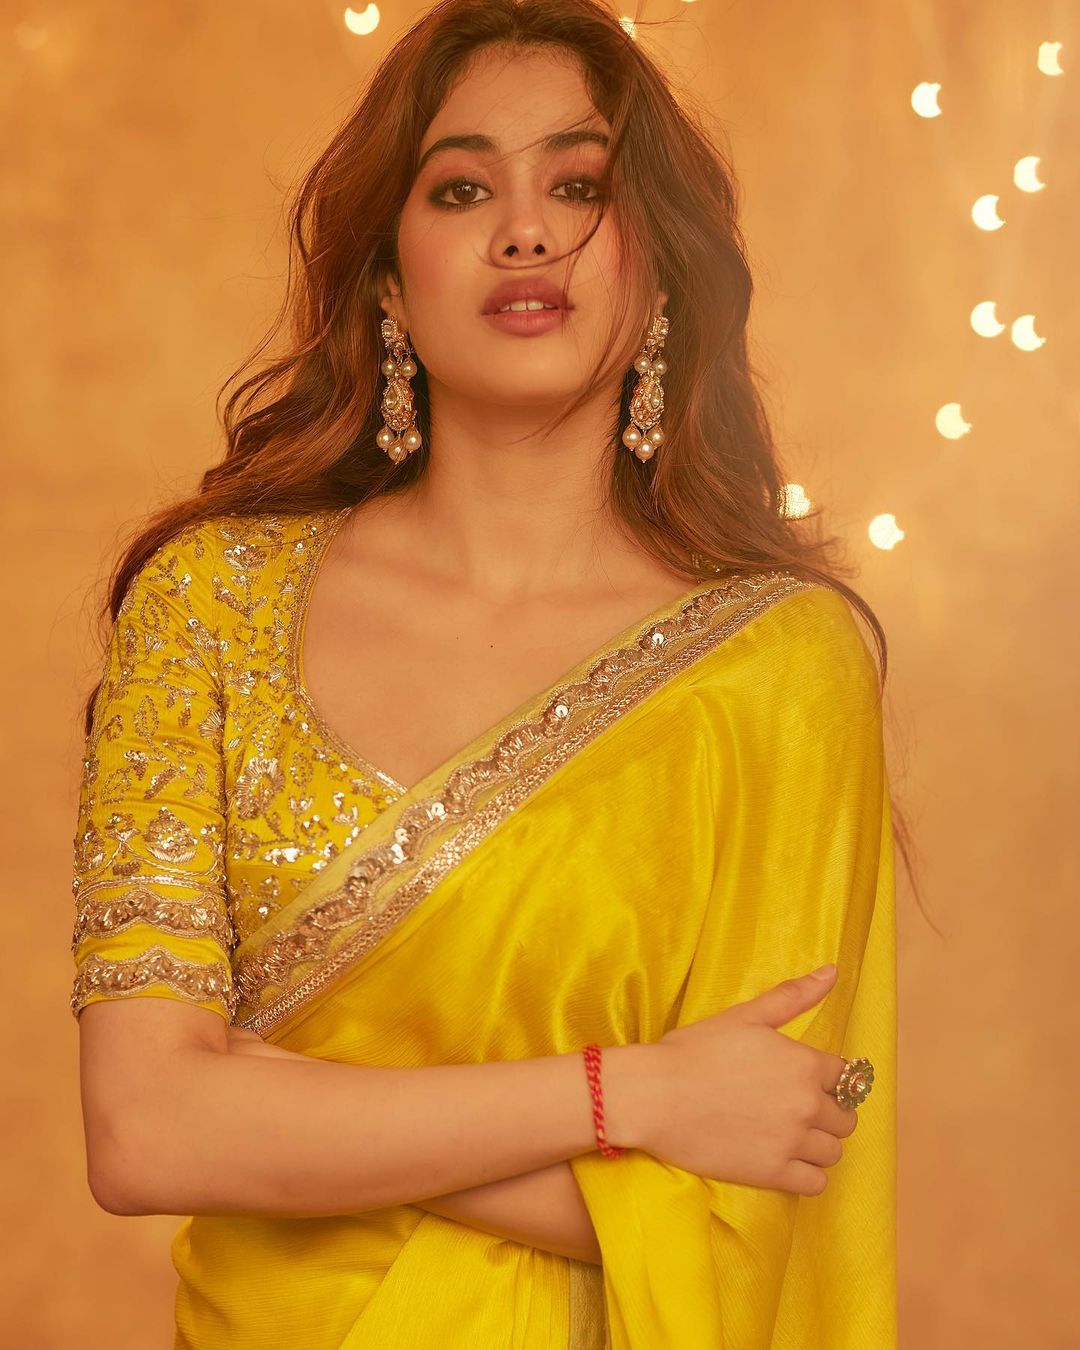 212+ Hd Images Of Yellow Saree For FREE - MyWeb